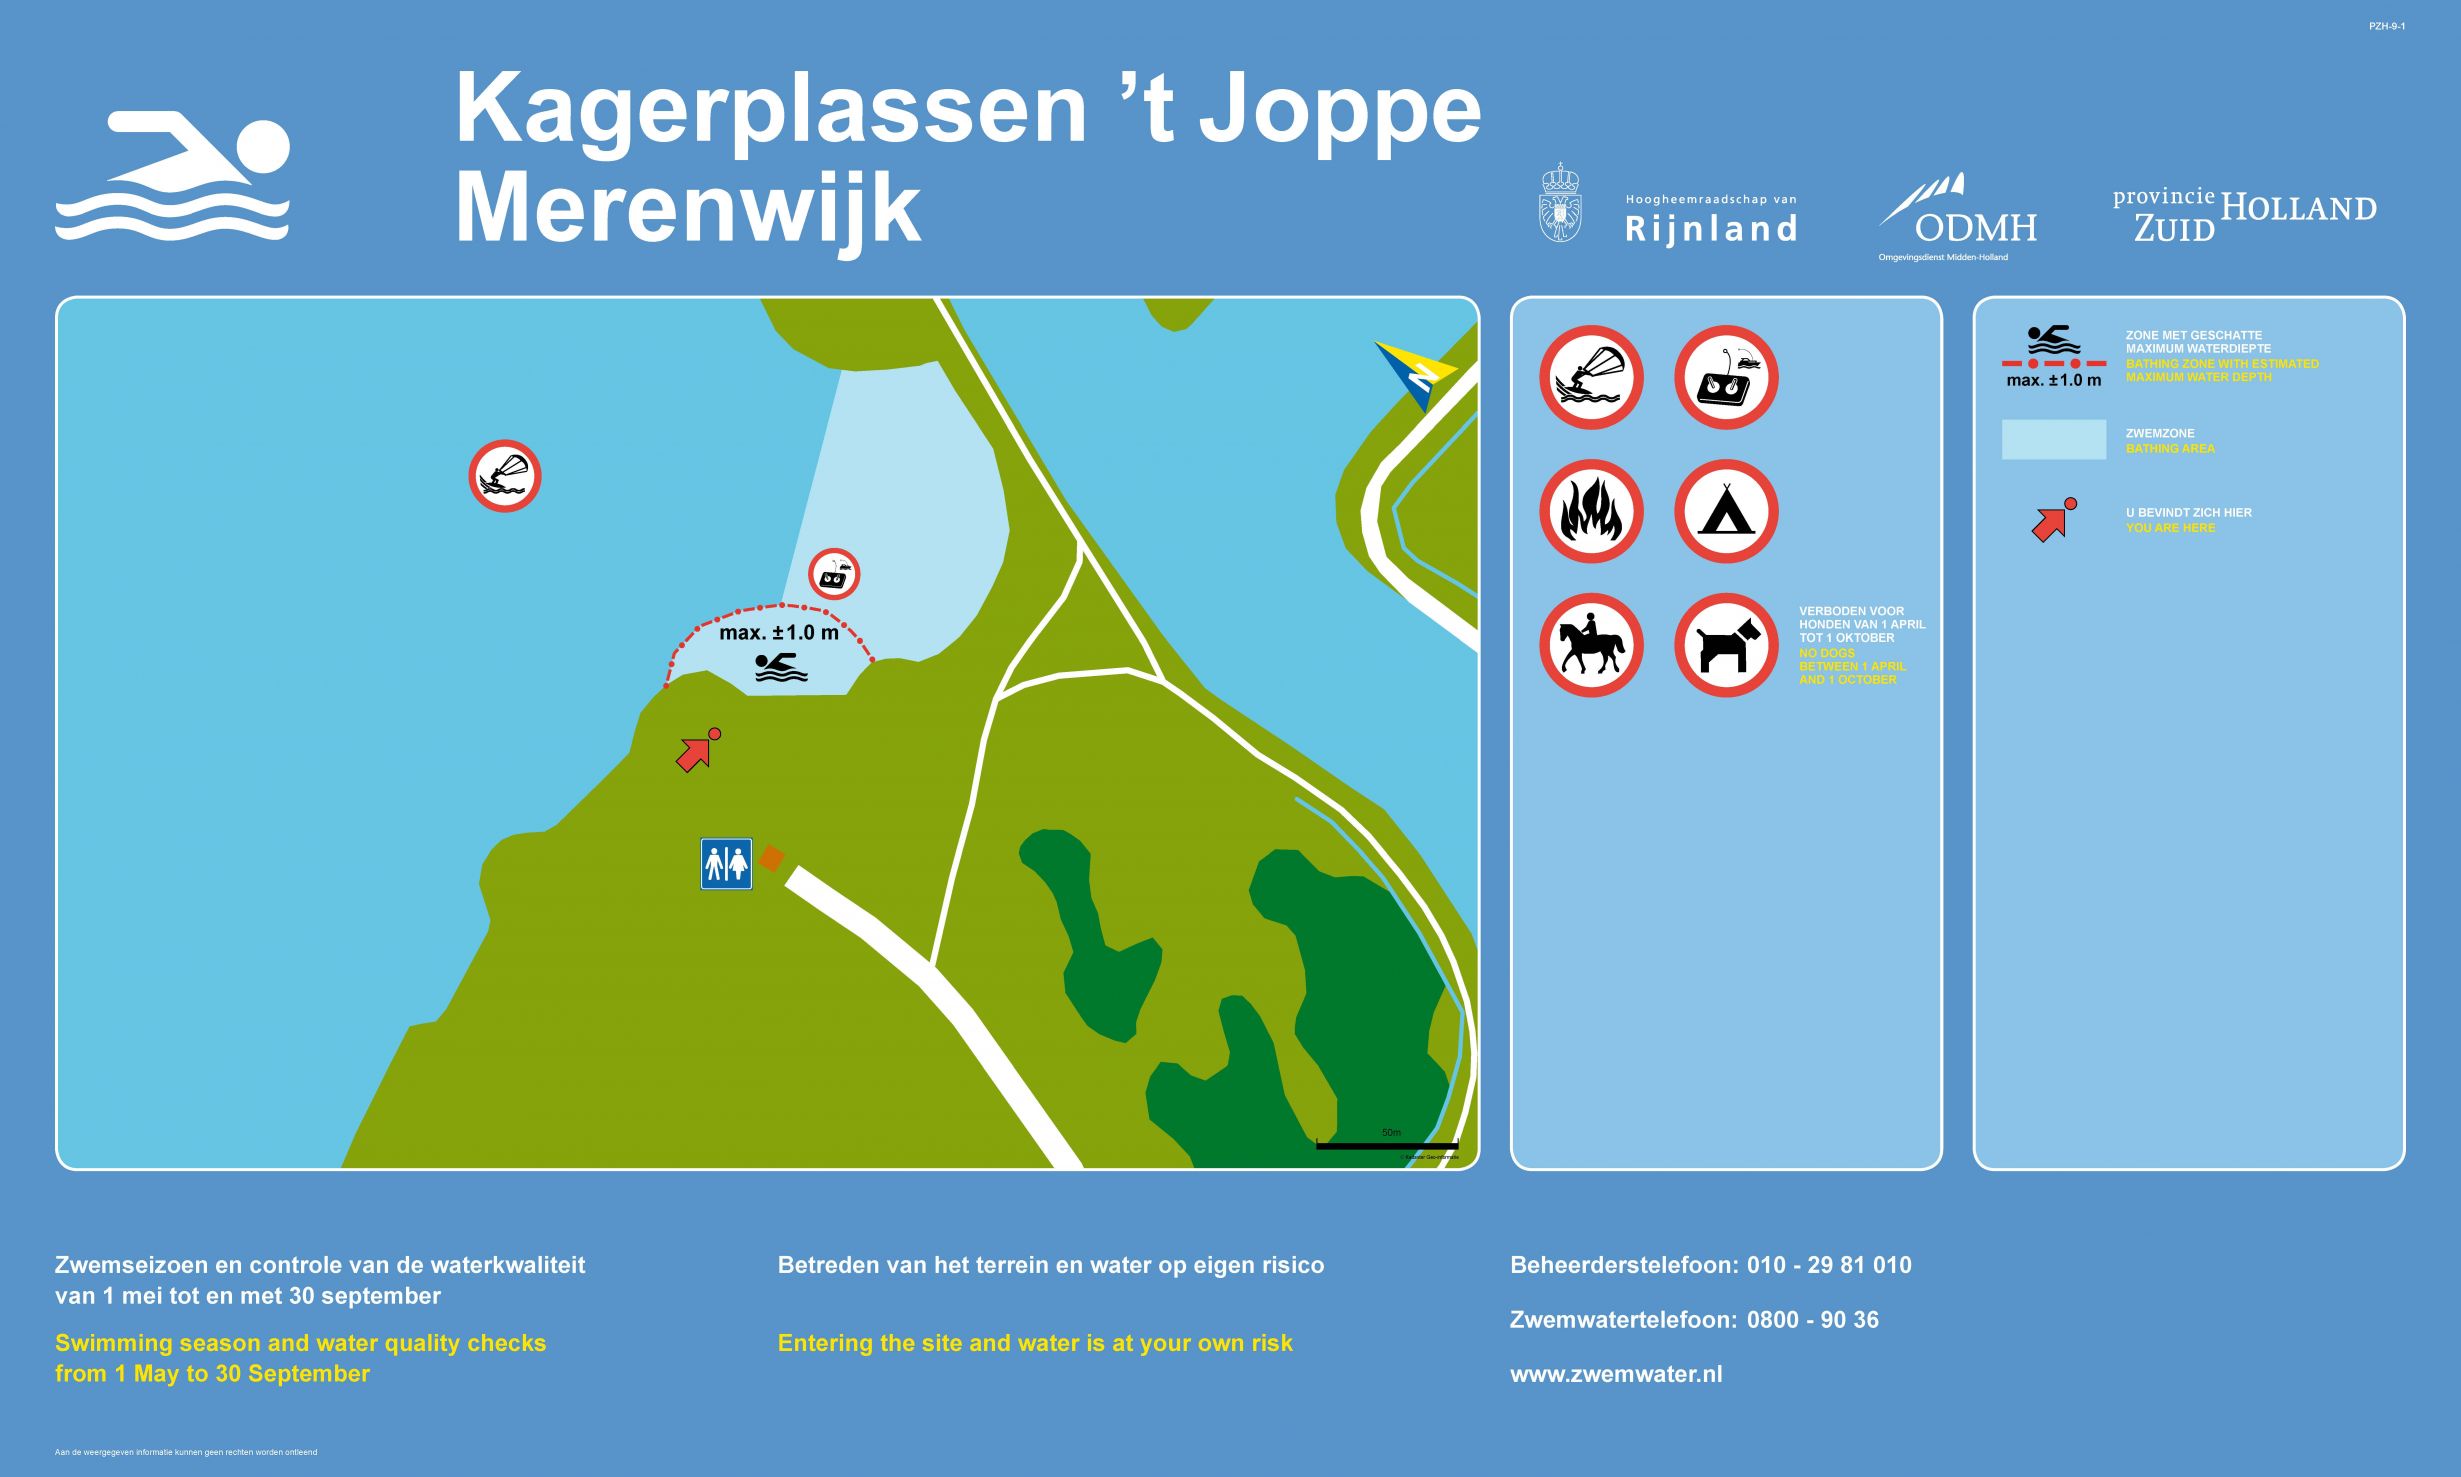 The information board at the swimming location Kagerplassen 't Joppe Merenwijk